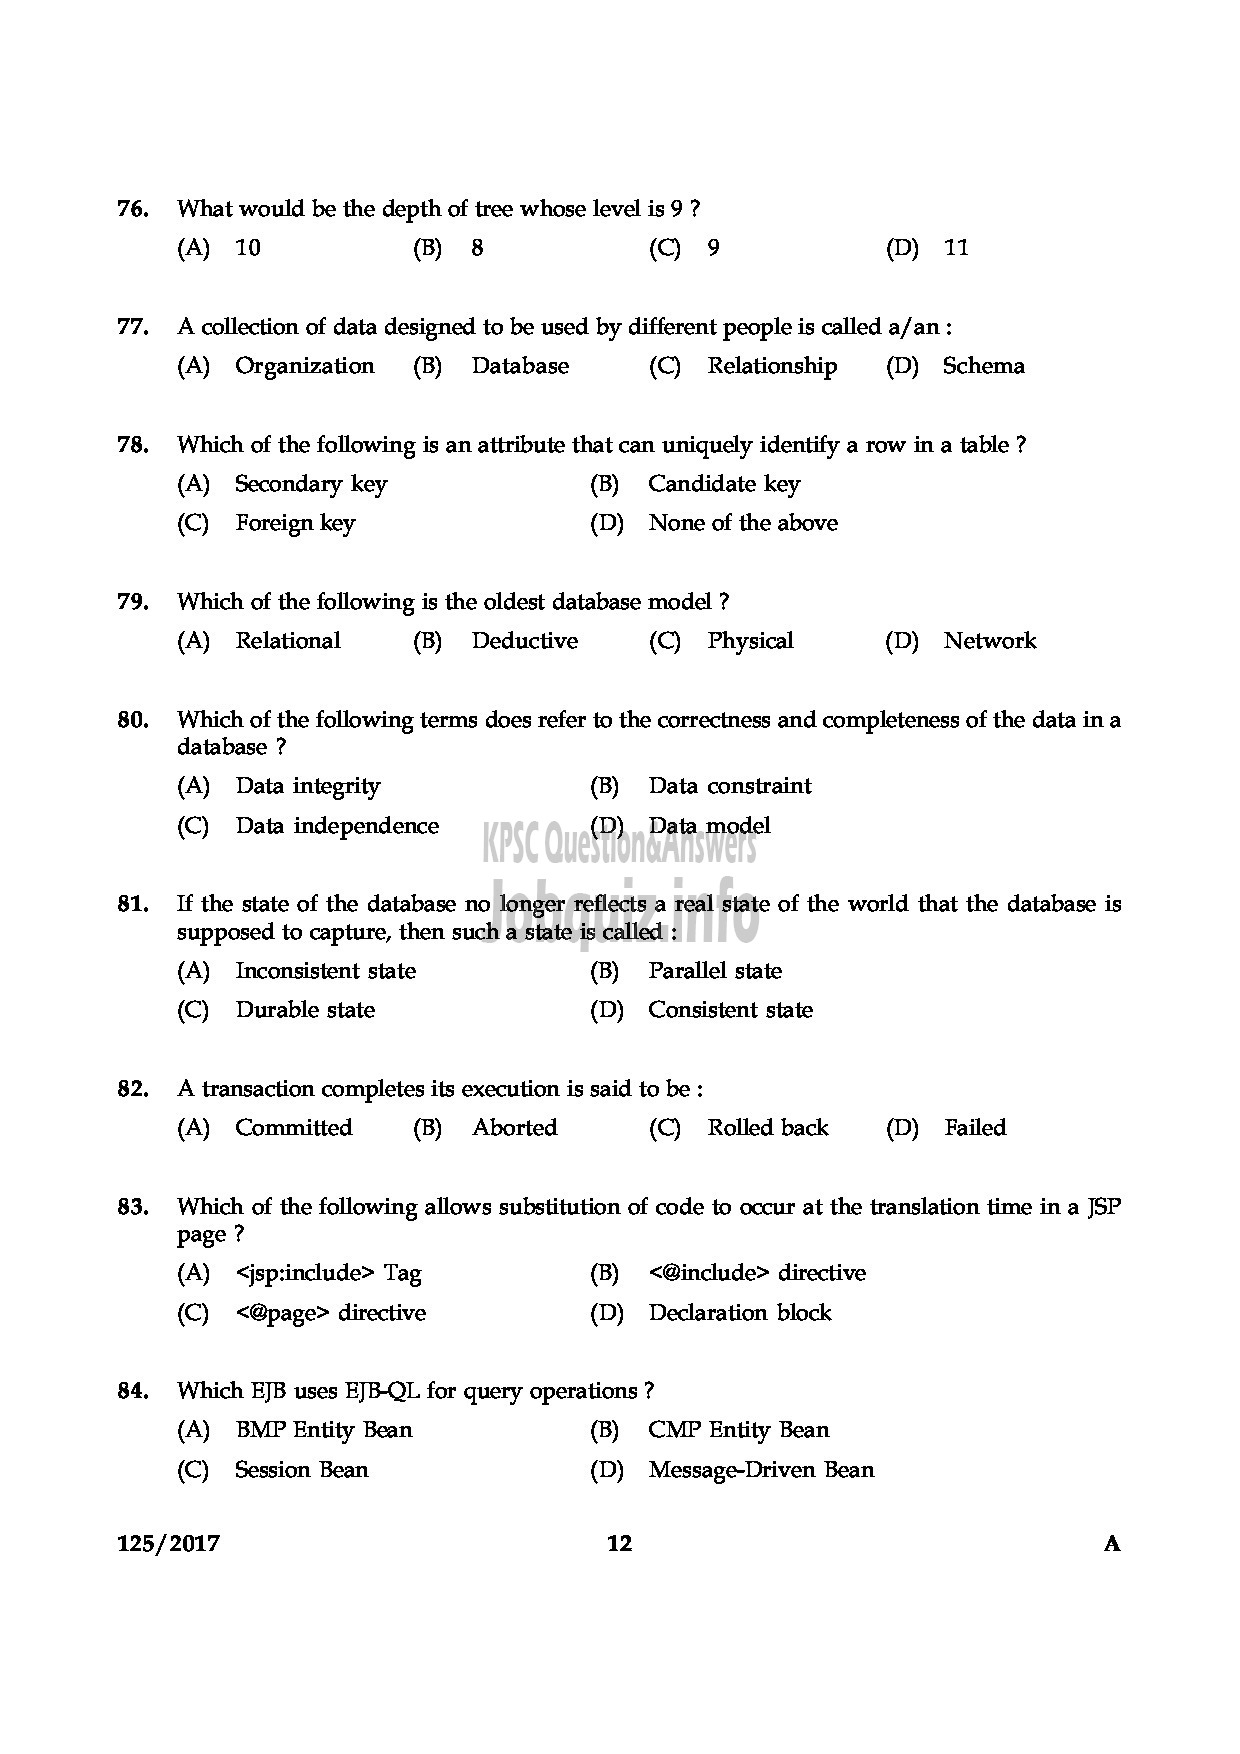 Kerala PSC Question Paper - LECTURER IN COMPUTER APPLICATION COLLEGIATE EDUCATION-12